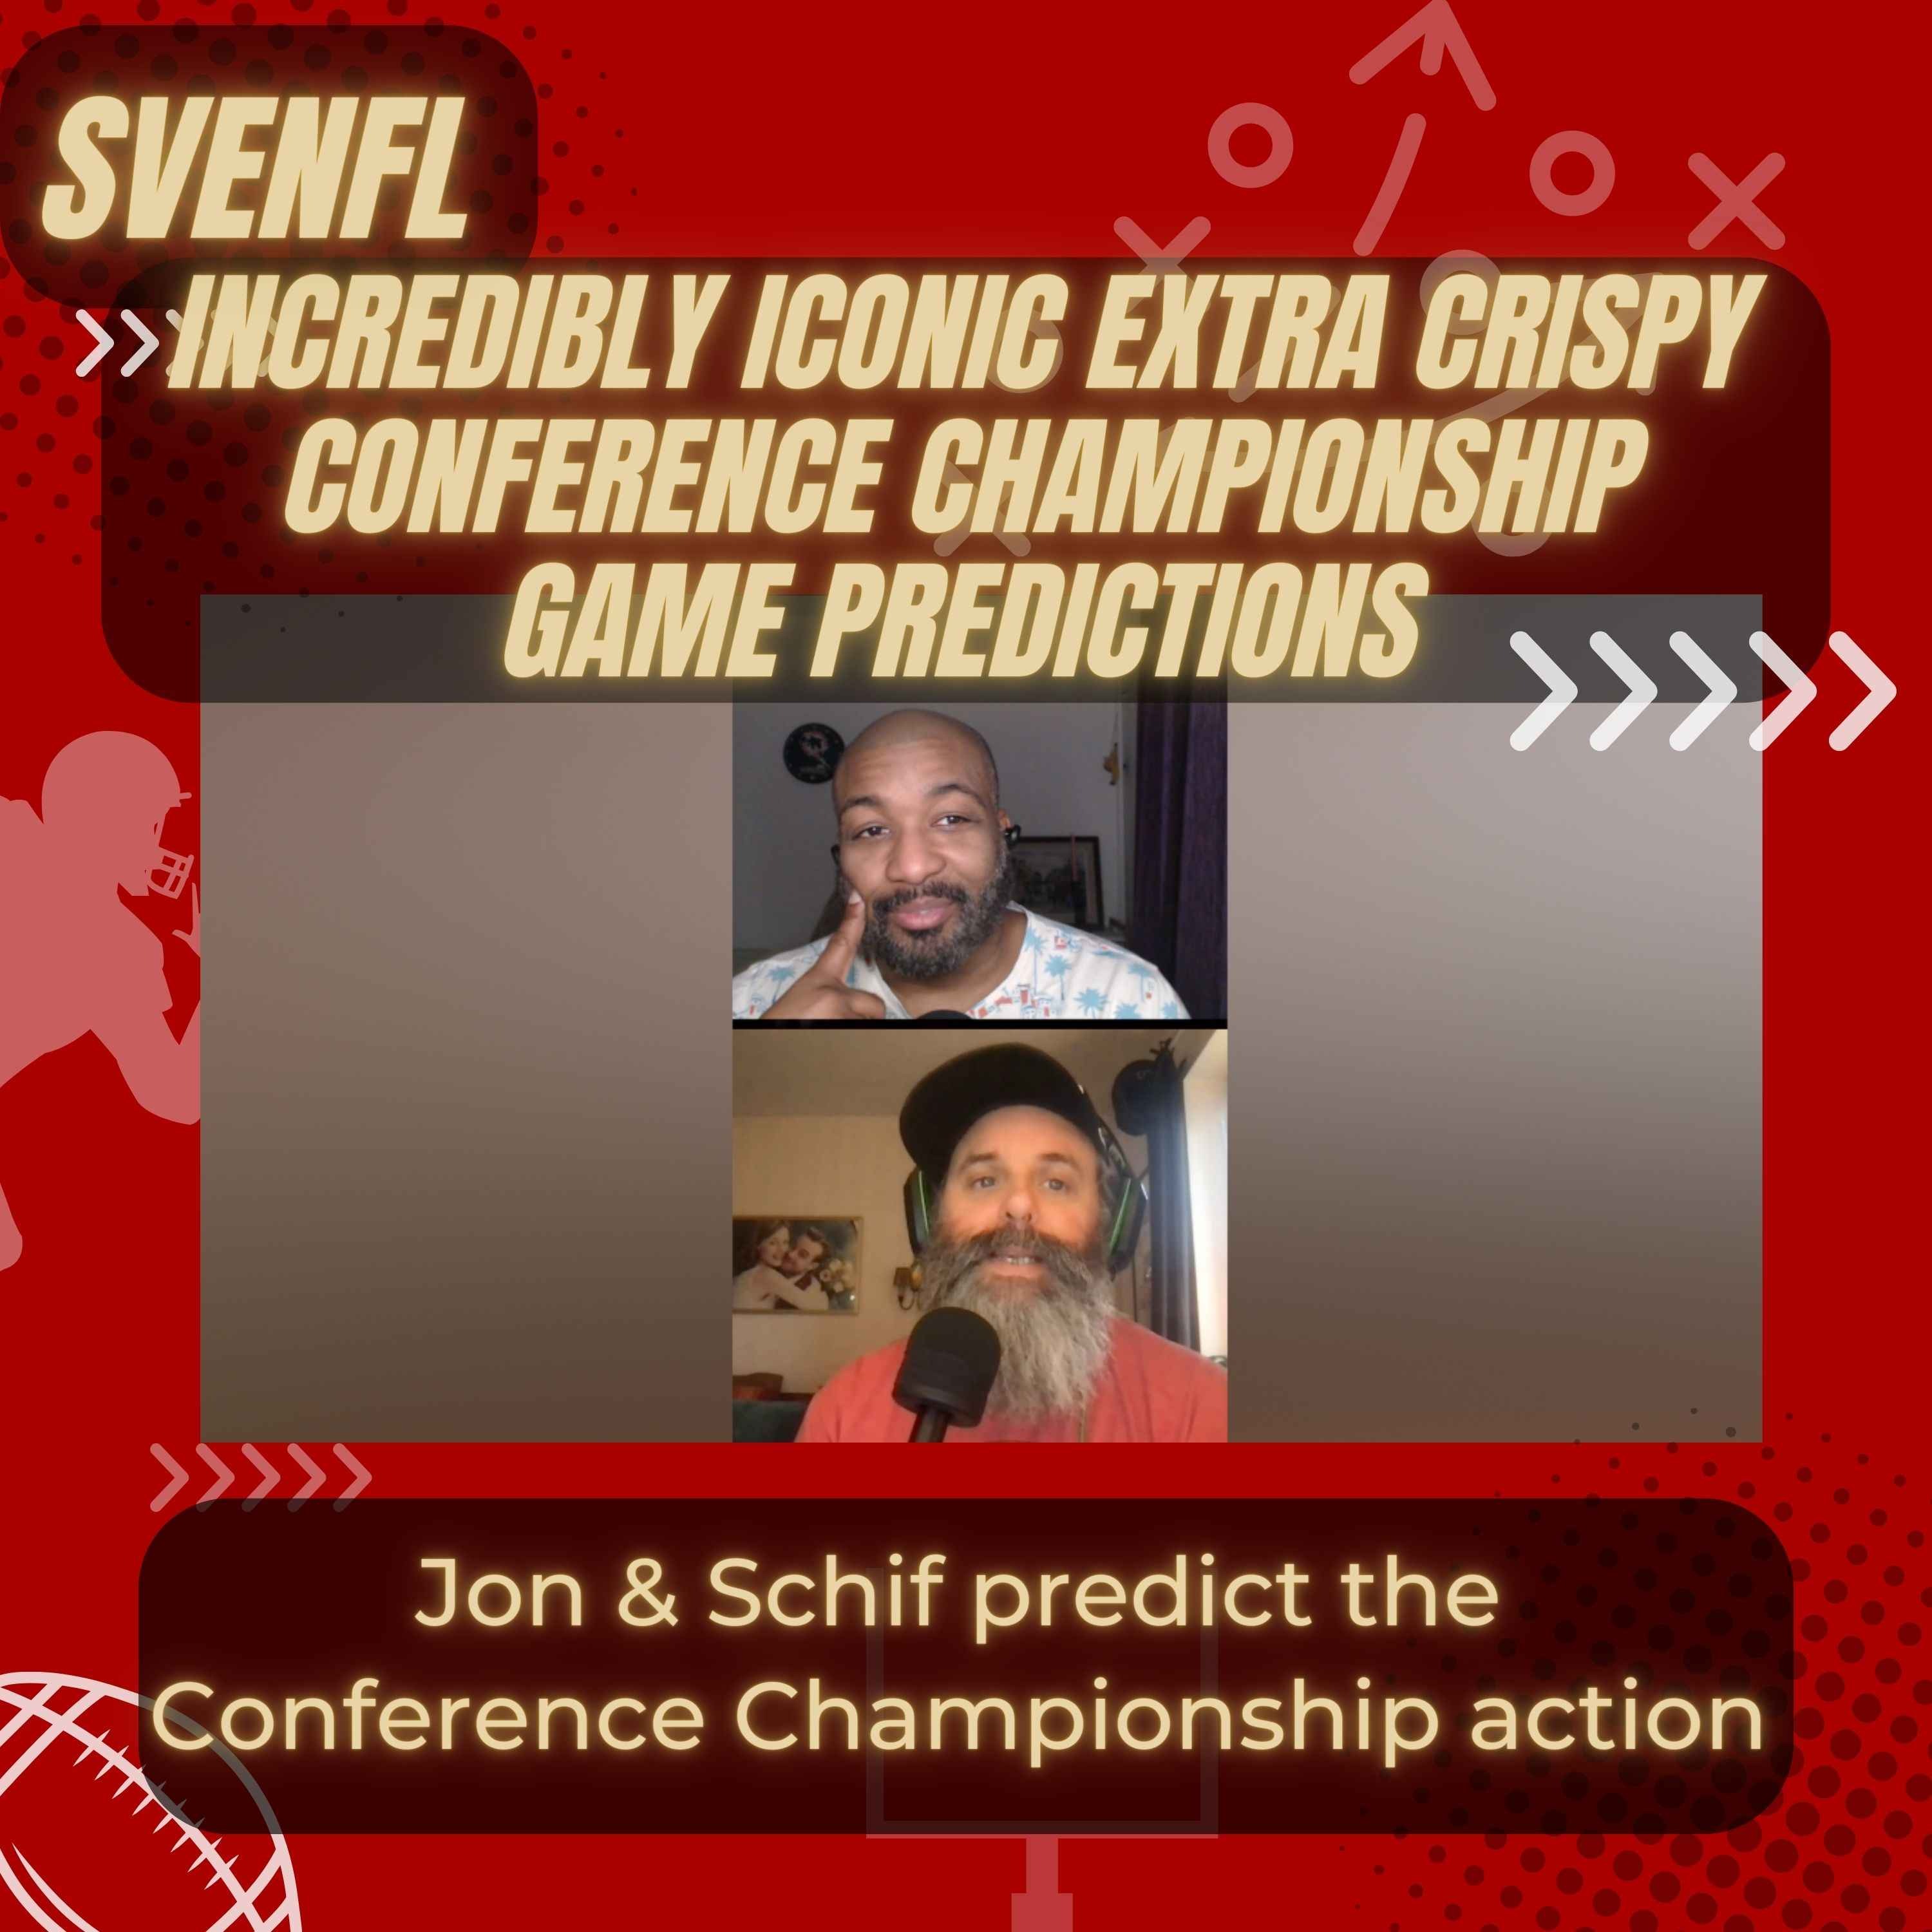 SveNFL Incredibly Iconic Extra Crispy Conference Championship Game